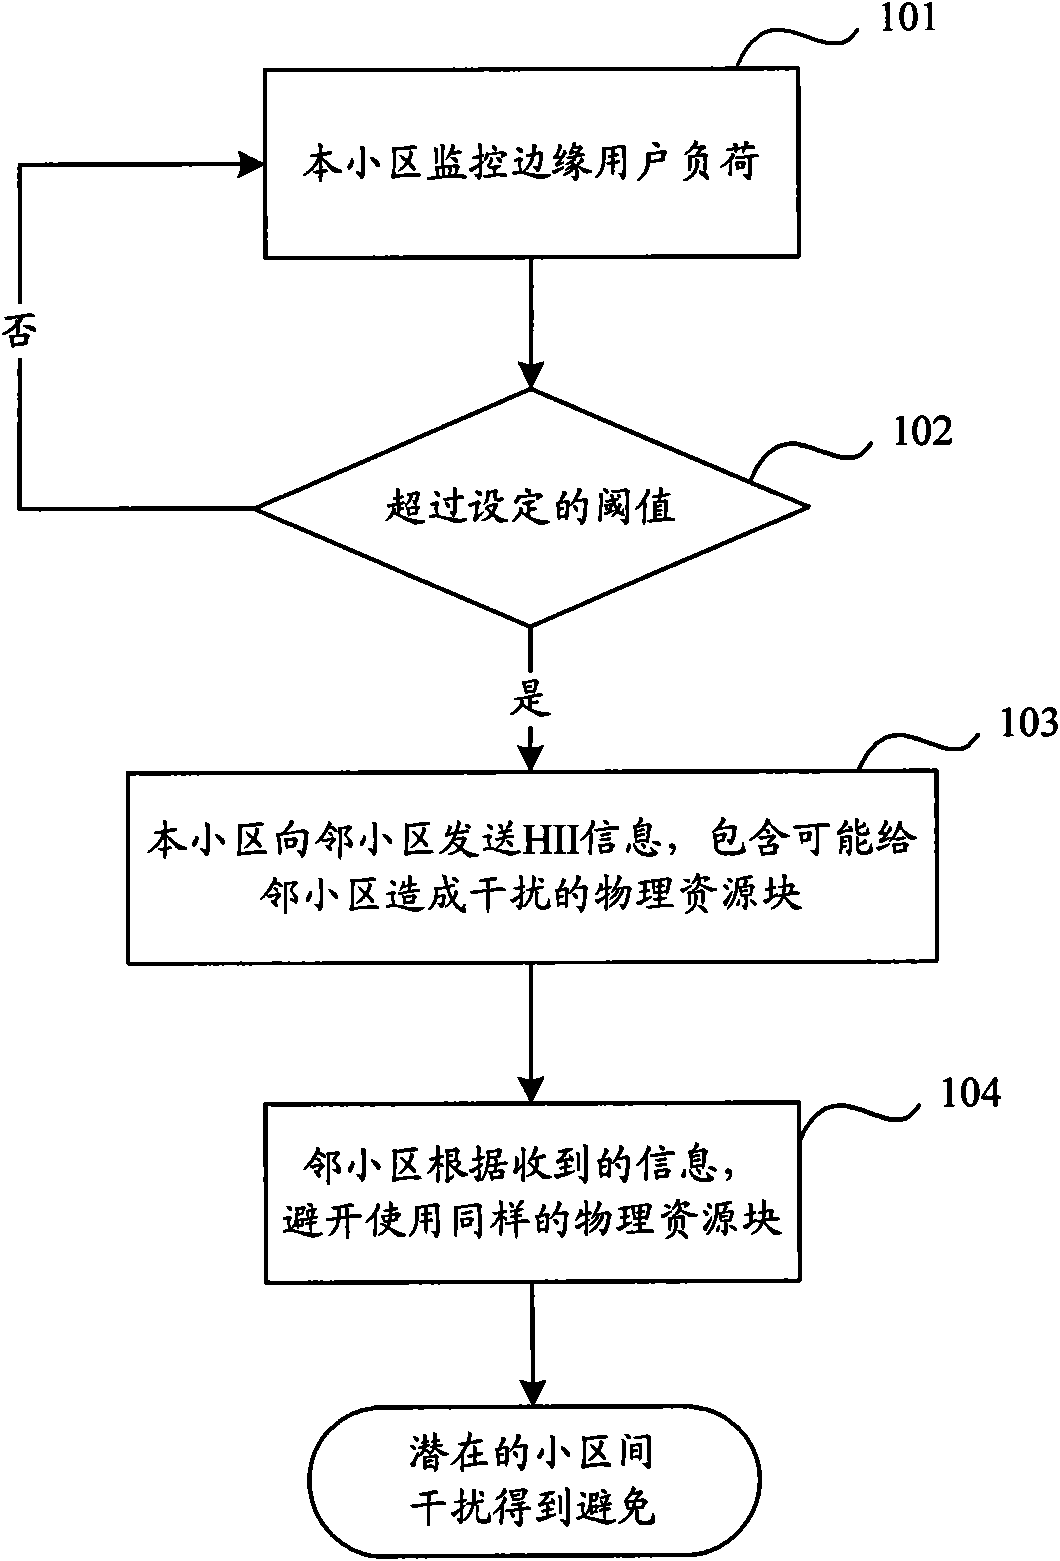 Method, device and system for eliminating interference among cells